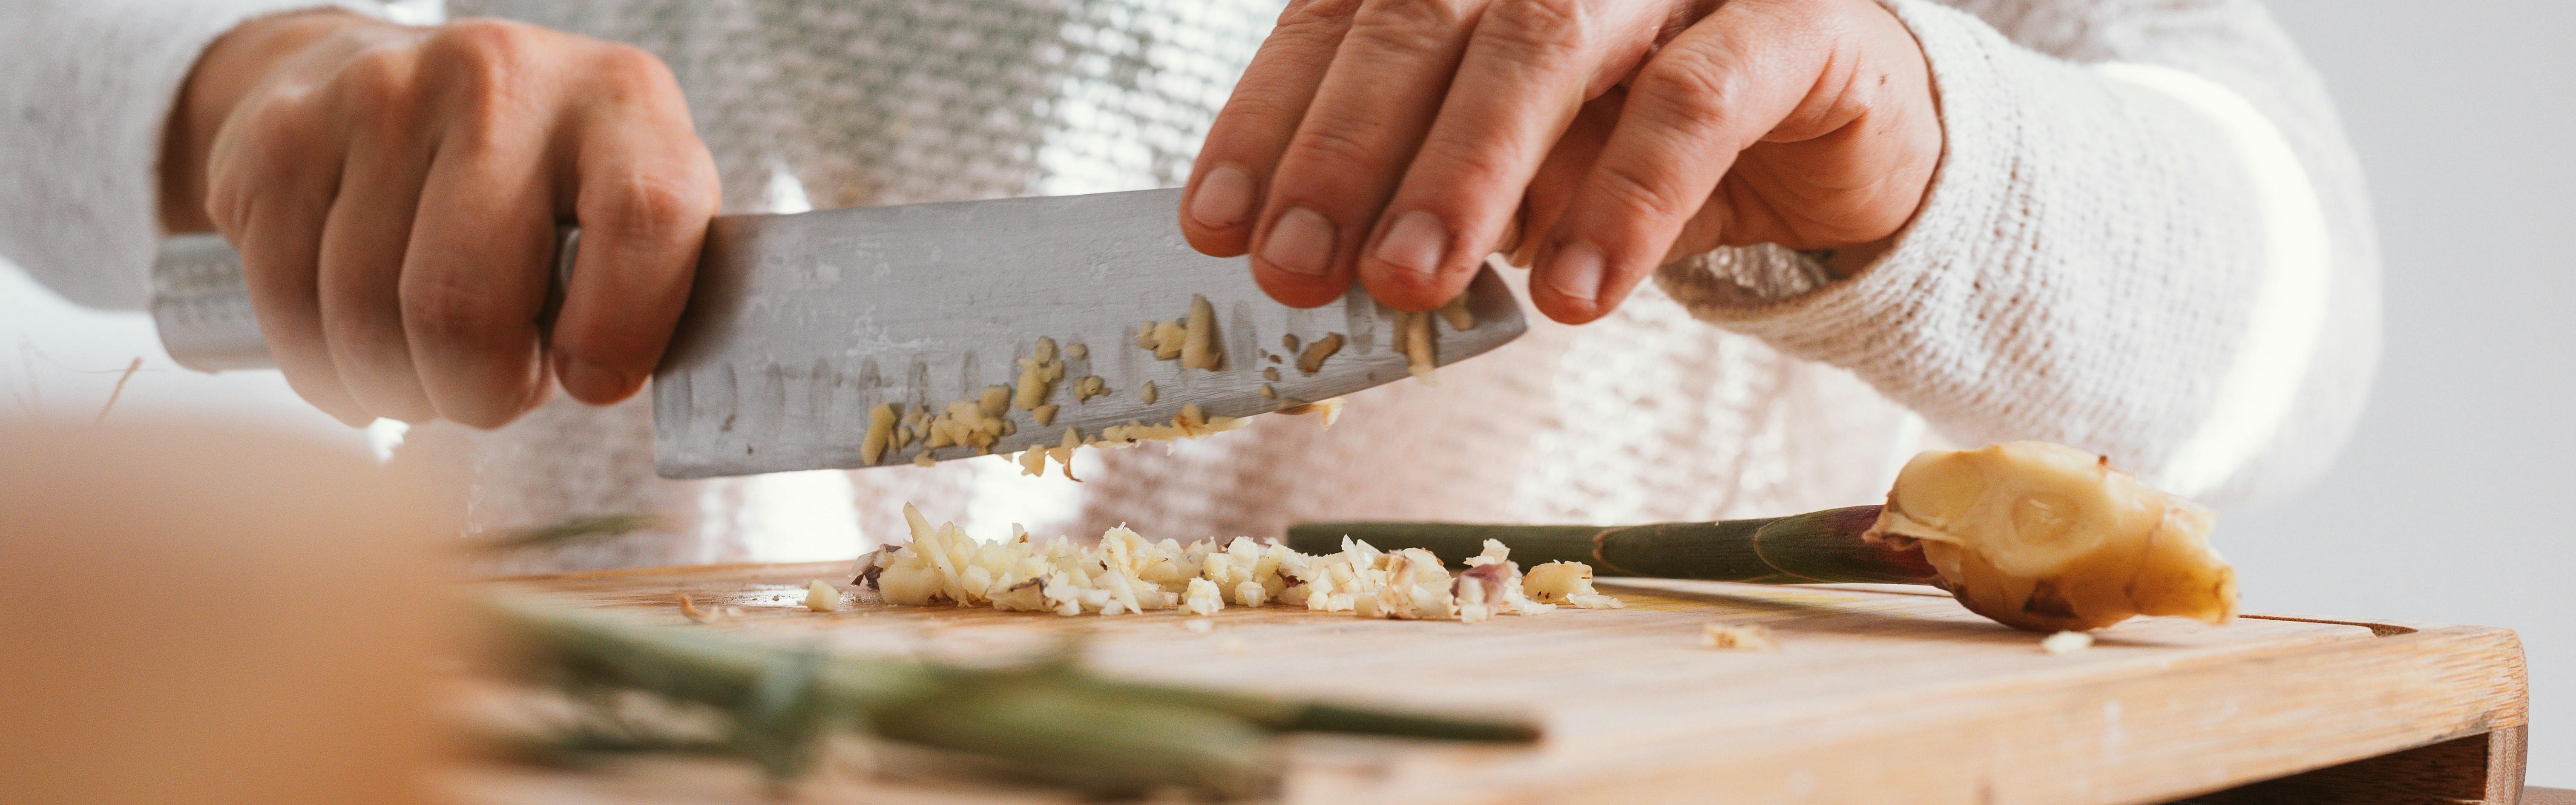 Someone chopping garlic with a knife.